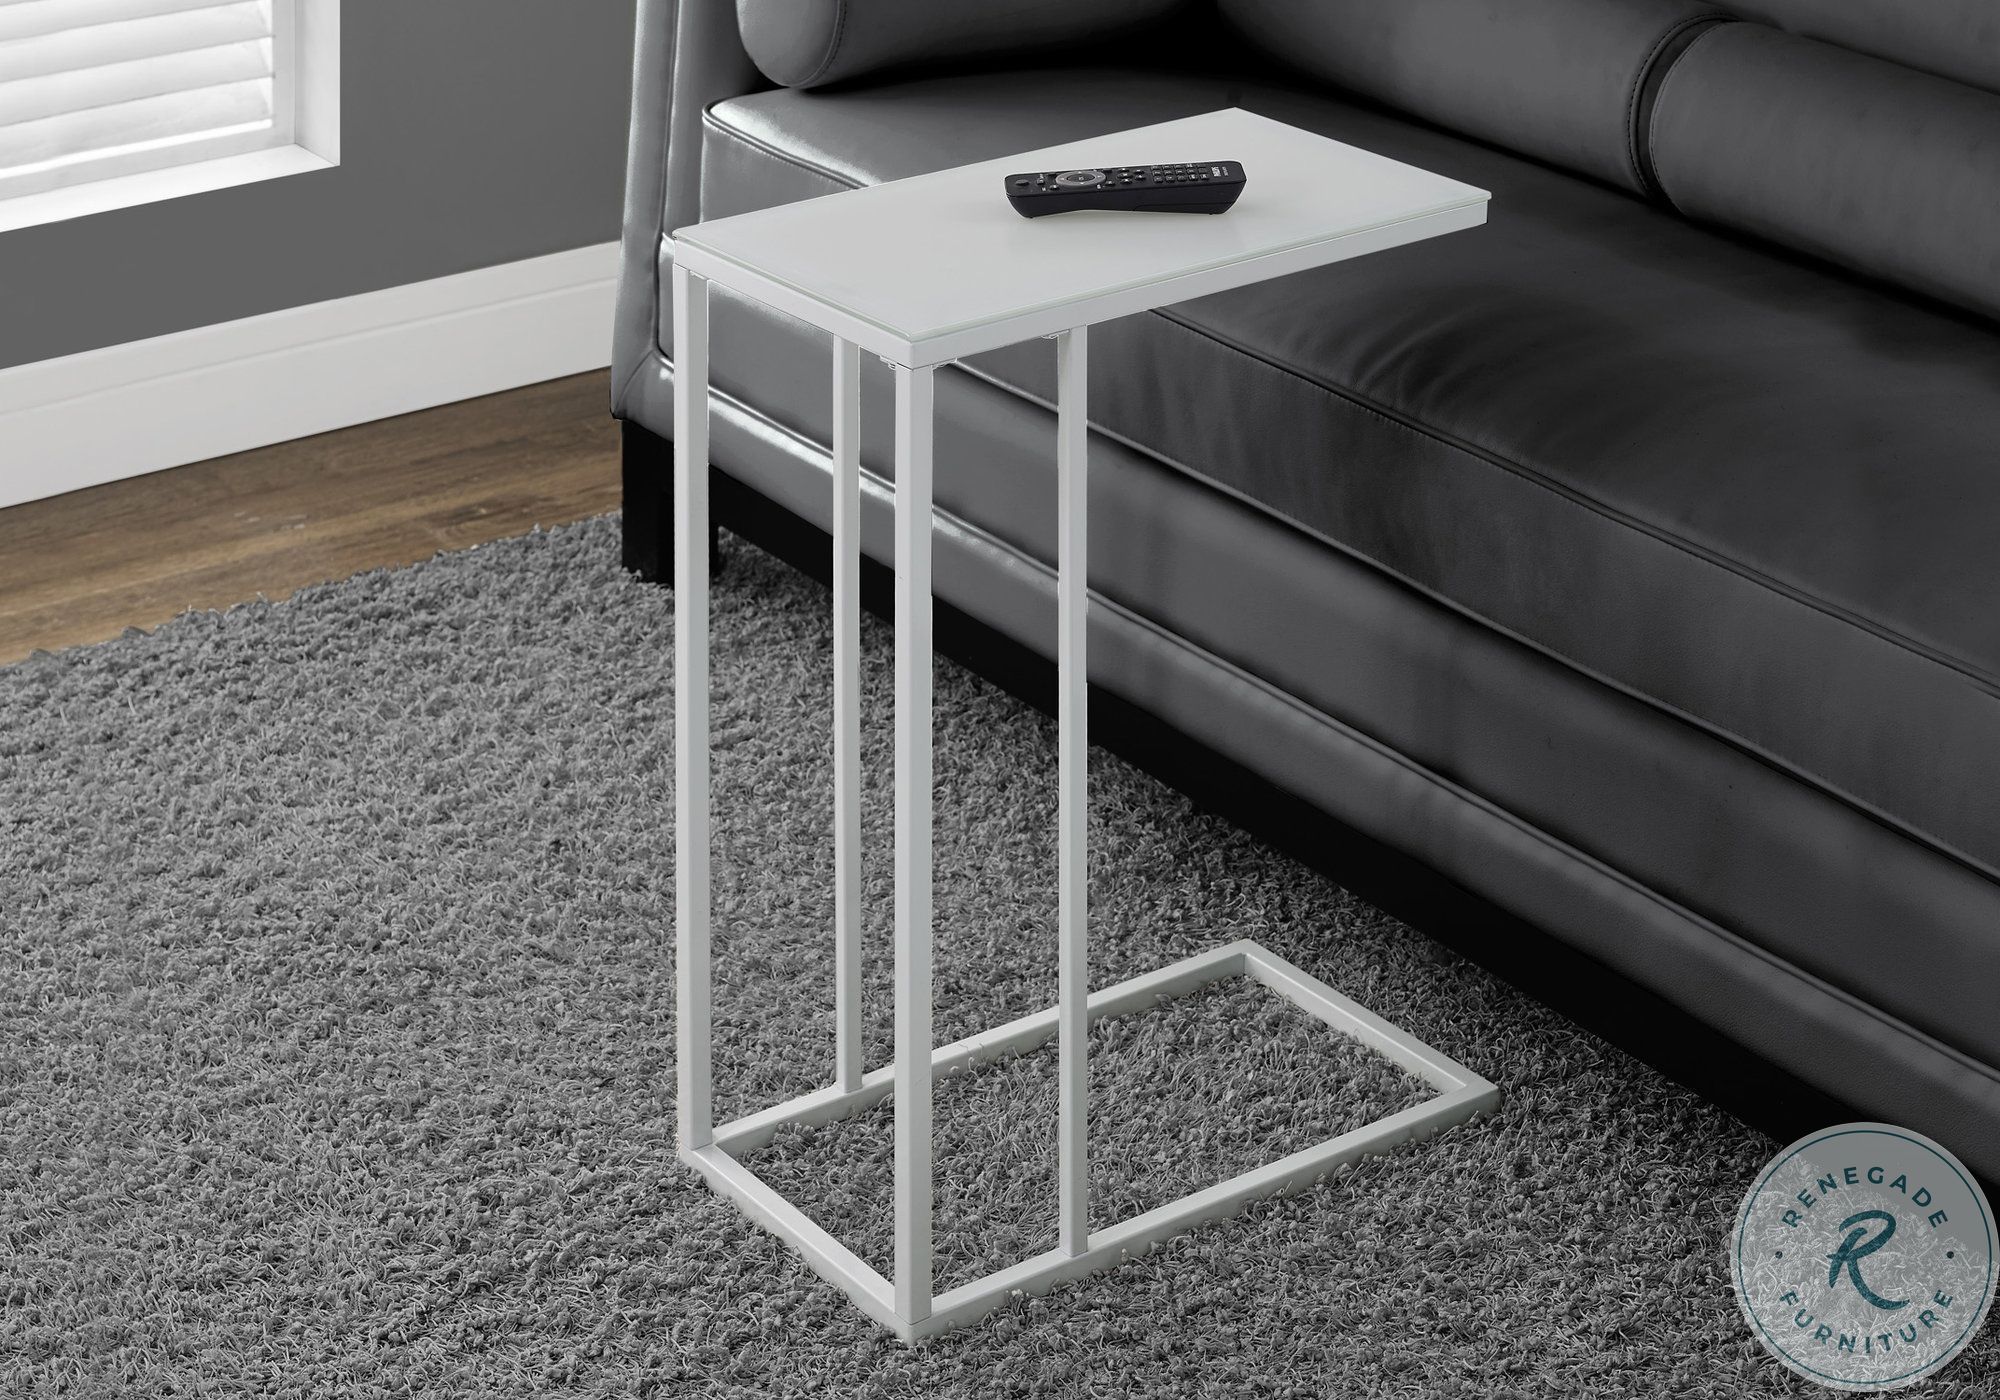 3037 White Metal Accent Table 3037